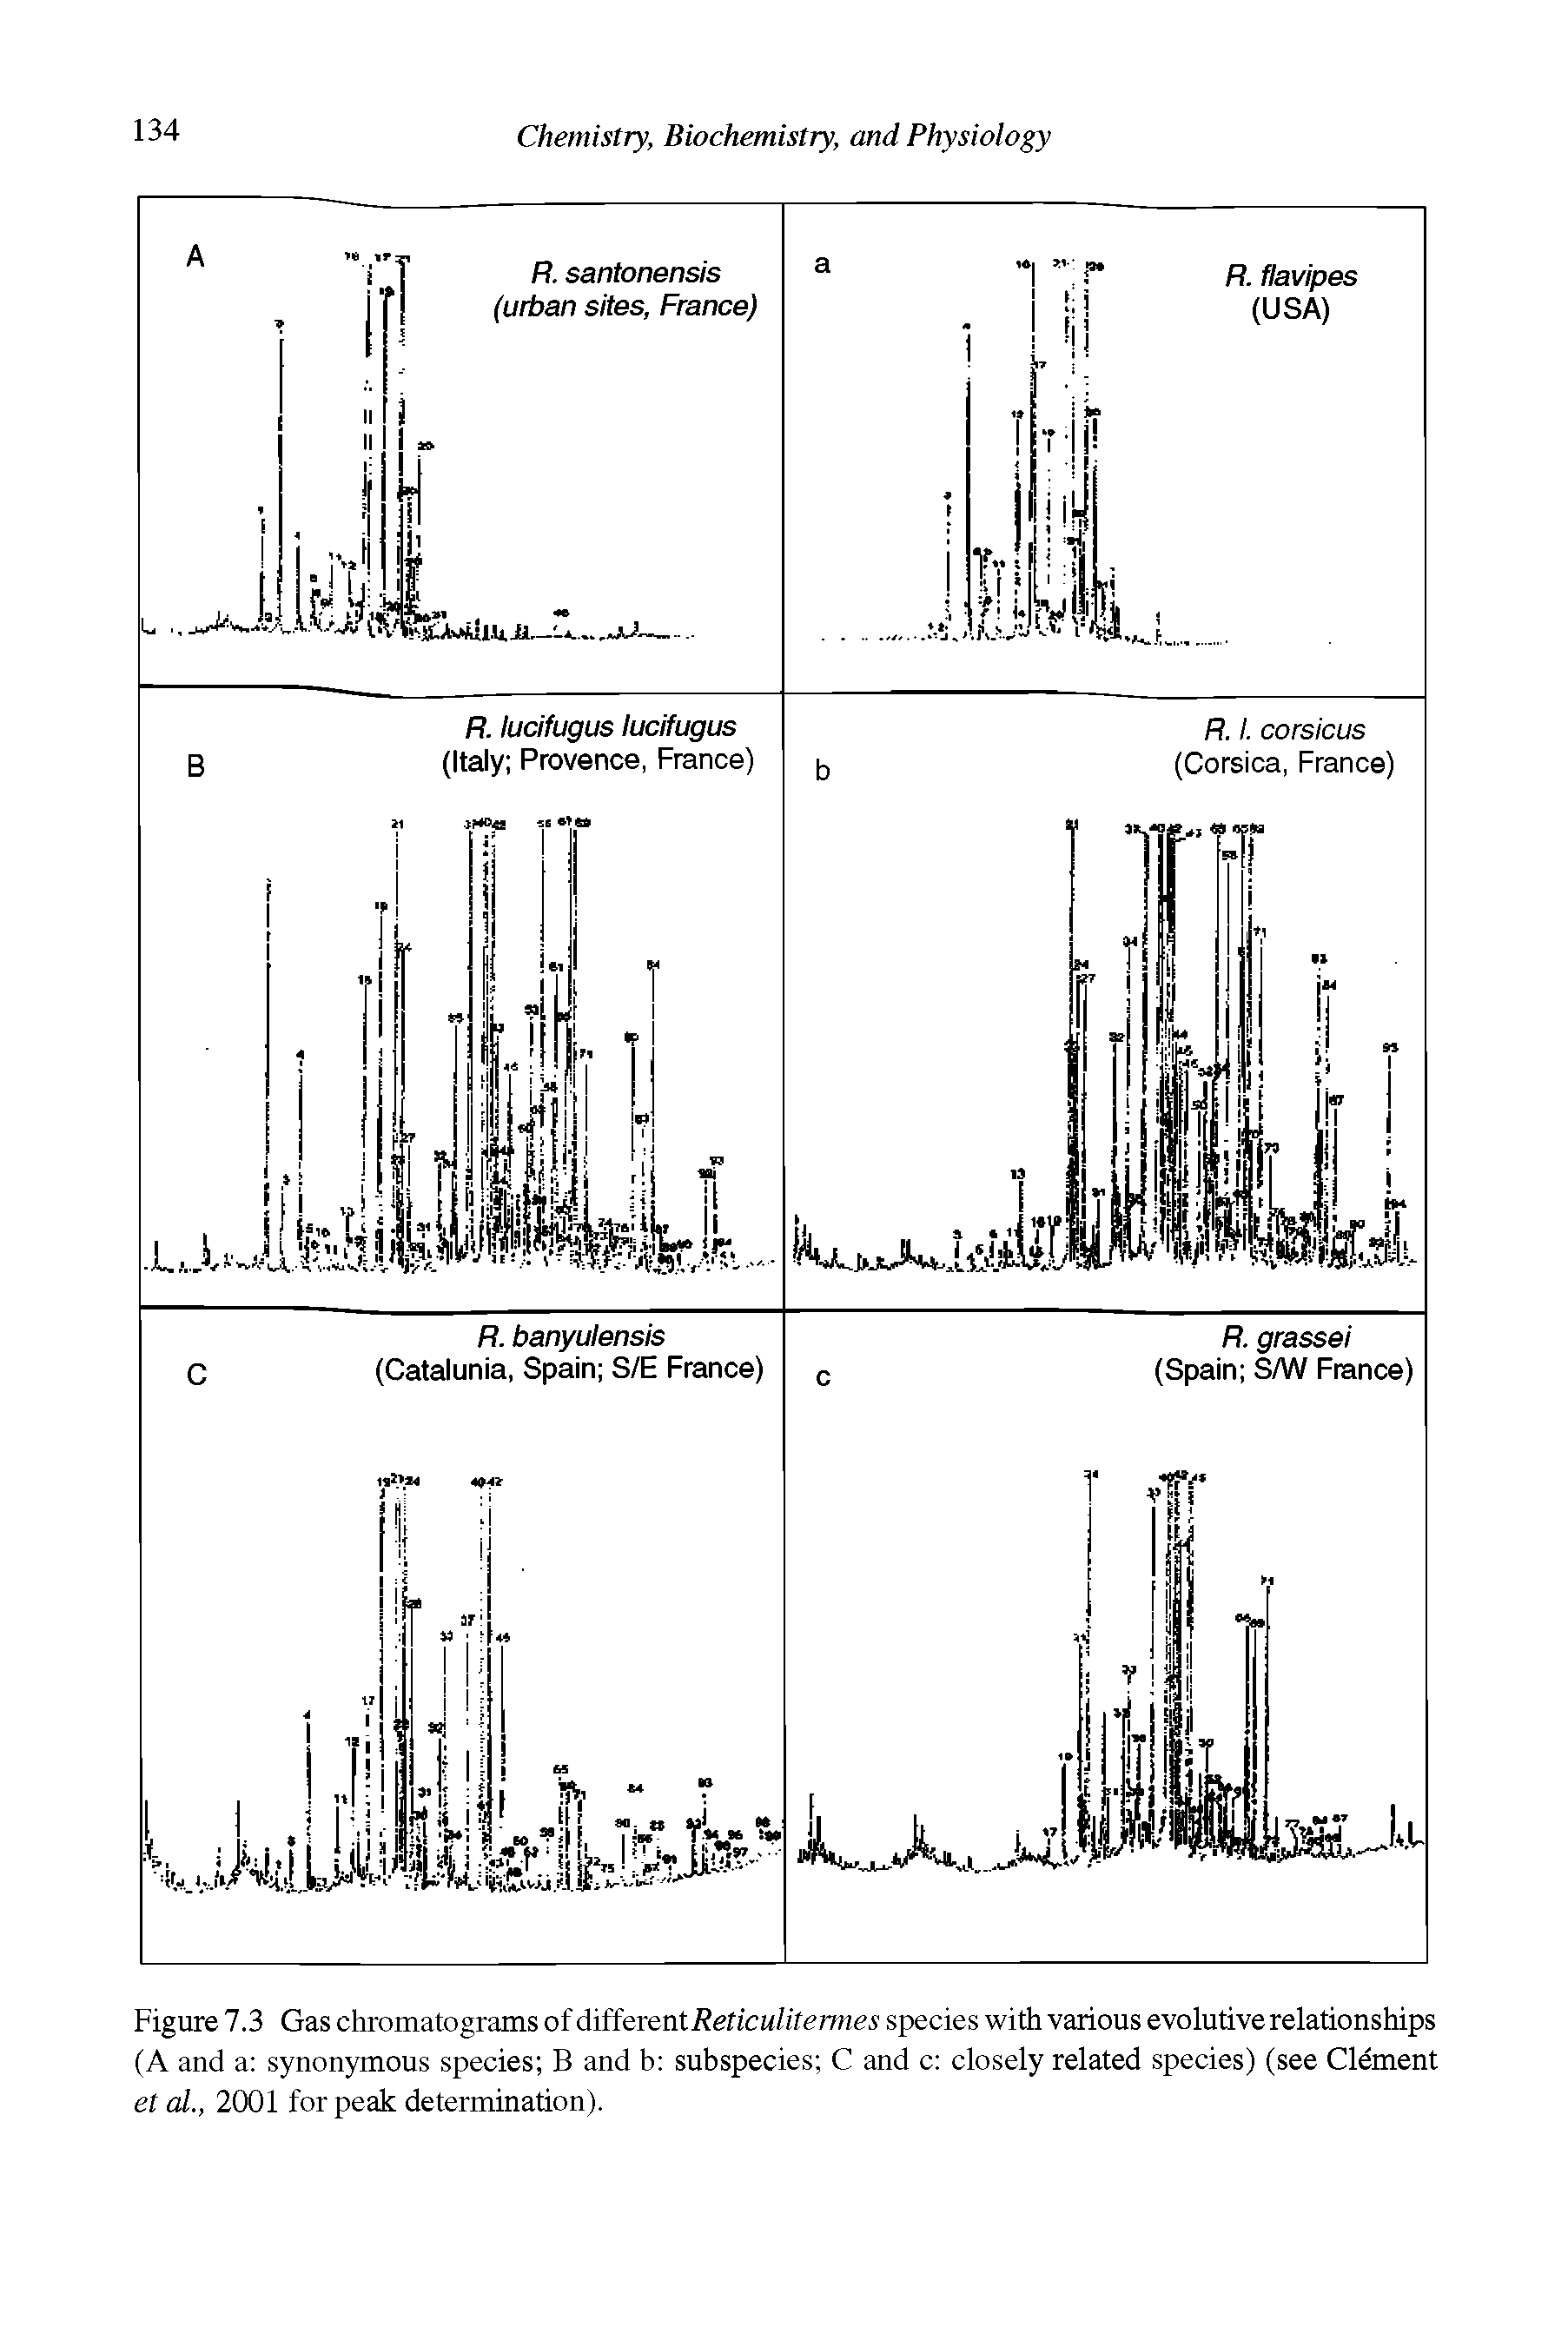 Figure 7.3 Gas chromatograms of ddiiexentReticulitermes species with various evolutive relationships (A and a synonymous species B and b subspecies C and c closely related species) (see Clement et al., 2001 for peak determination).